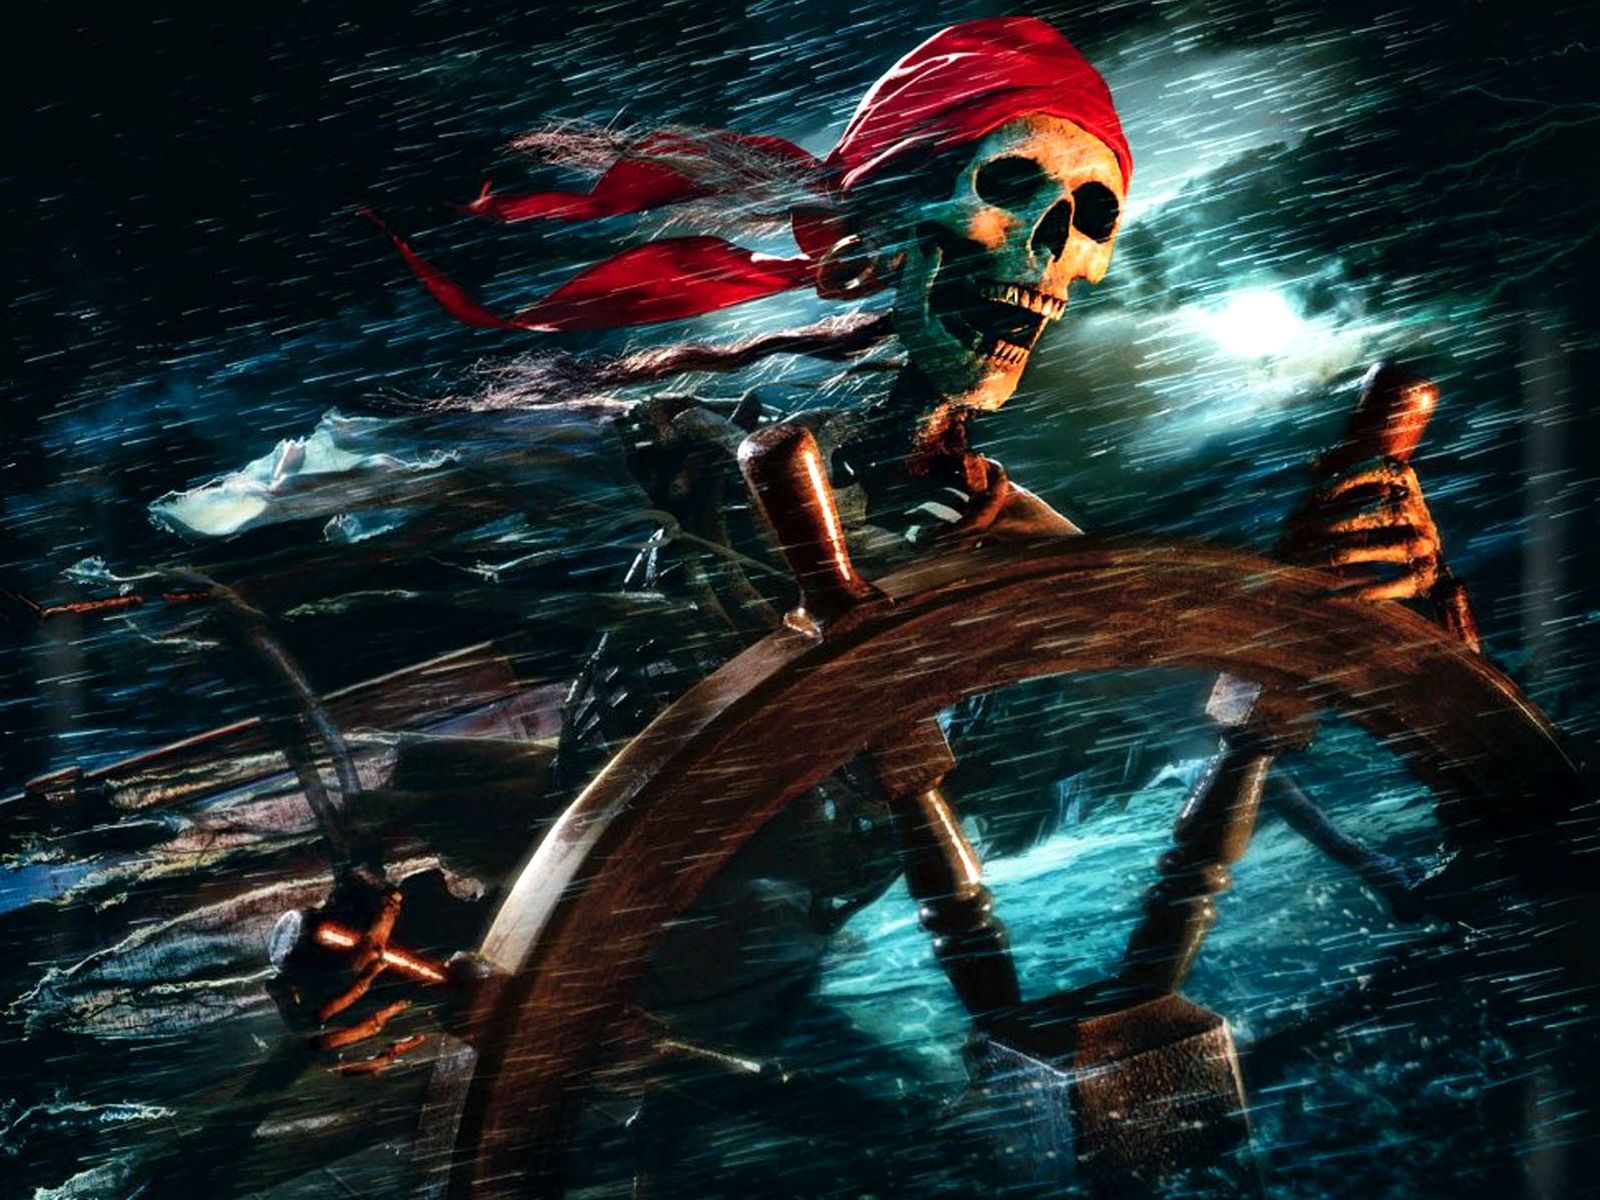 Pirates of the Caribbean wallpapers and images - wallpapers ...